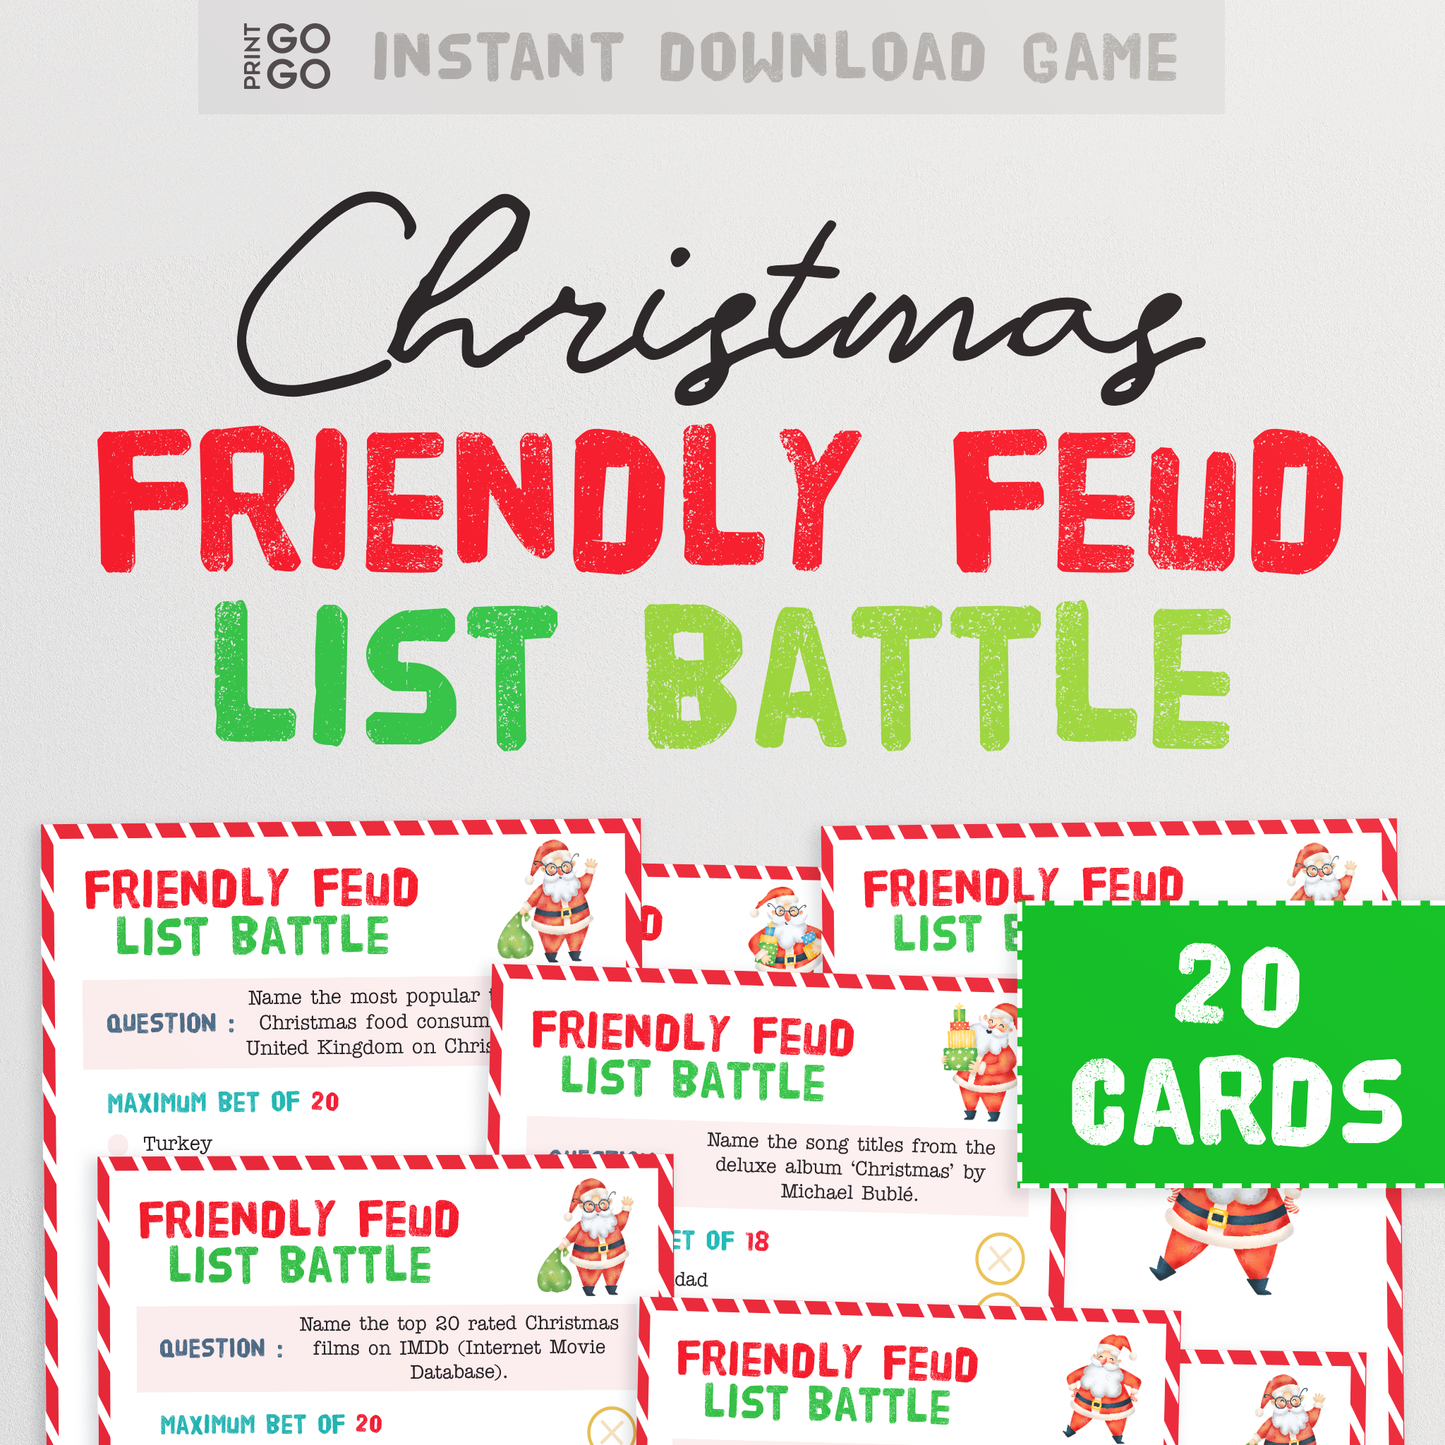 Christmas Friendly Feud 'List Battle' - The Fun New and Original Way To Play! Group Party Game of Questions, Betting and Stealing Lists